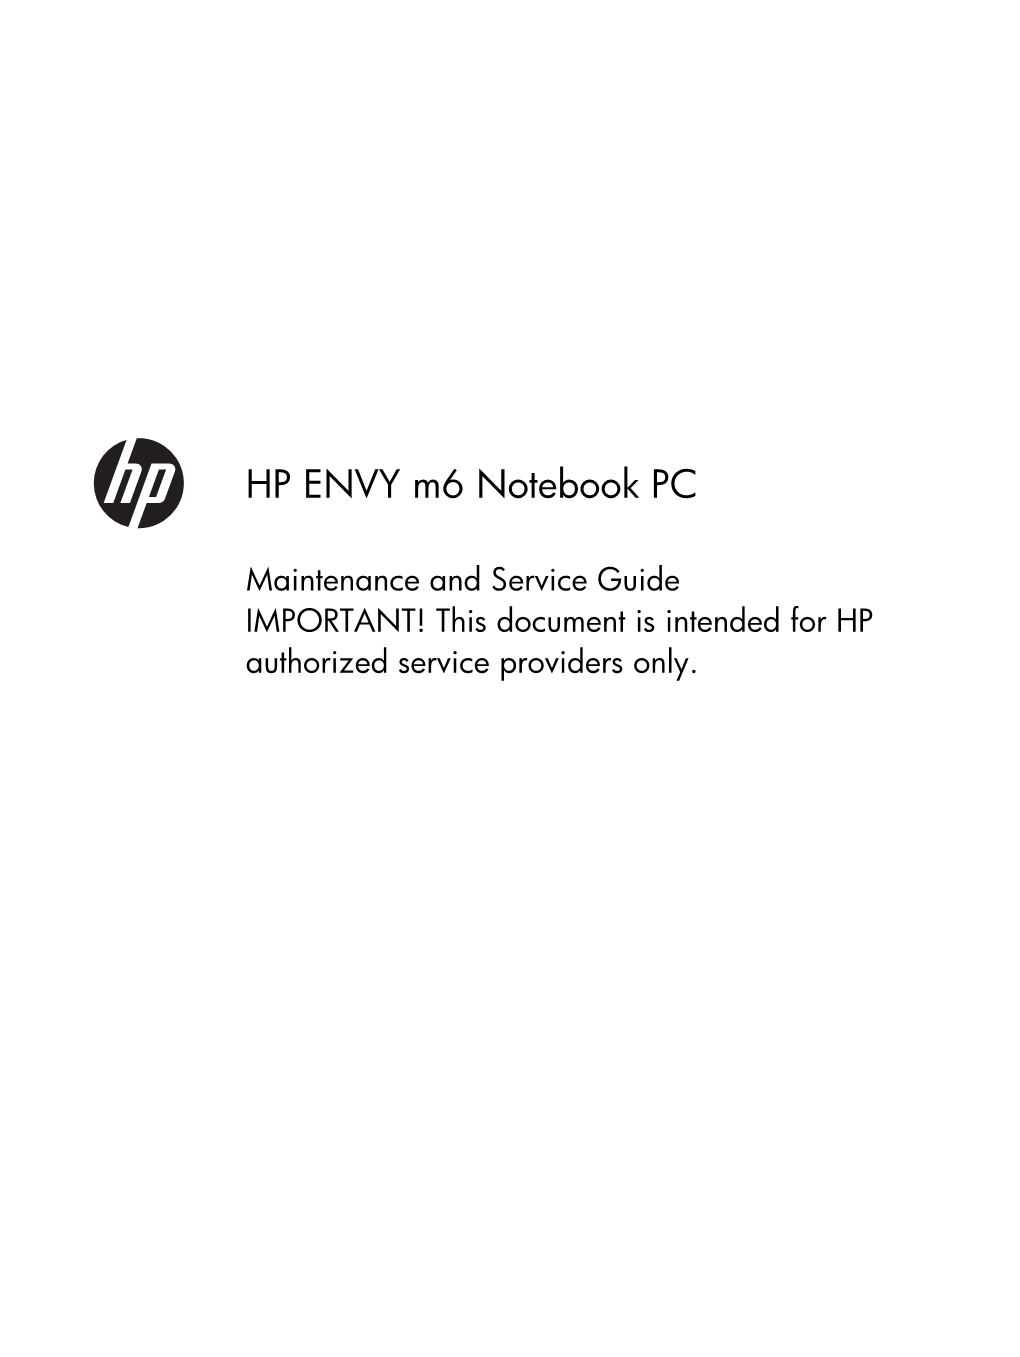 HP ENVY M6 Notebook PC Maintenance and Service Guide